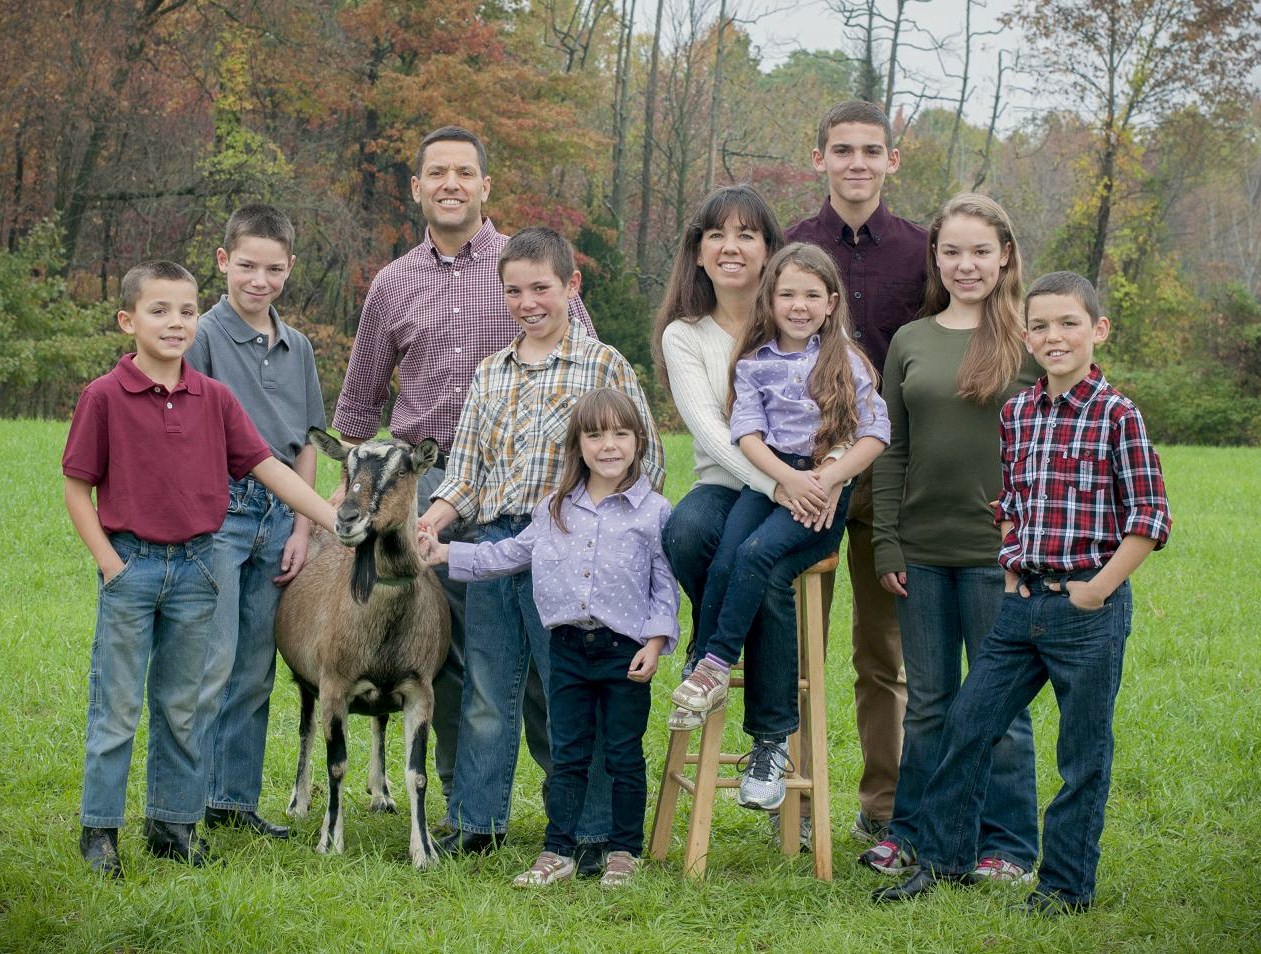 The Jonas family makes natural Goat Milk Stuff soaps, lotions and more on their Indiana farm.